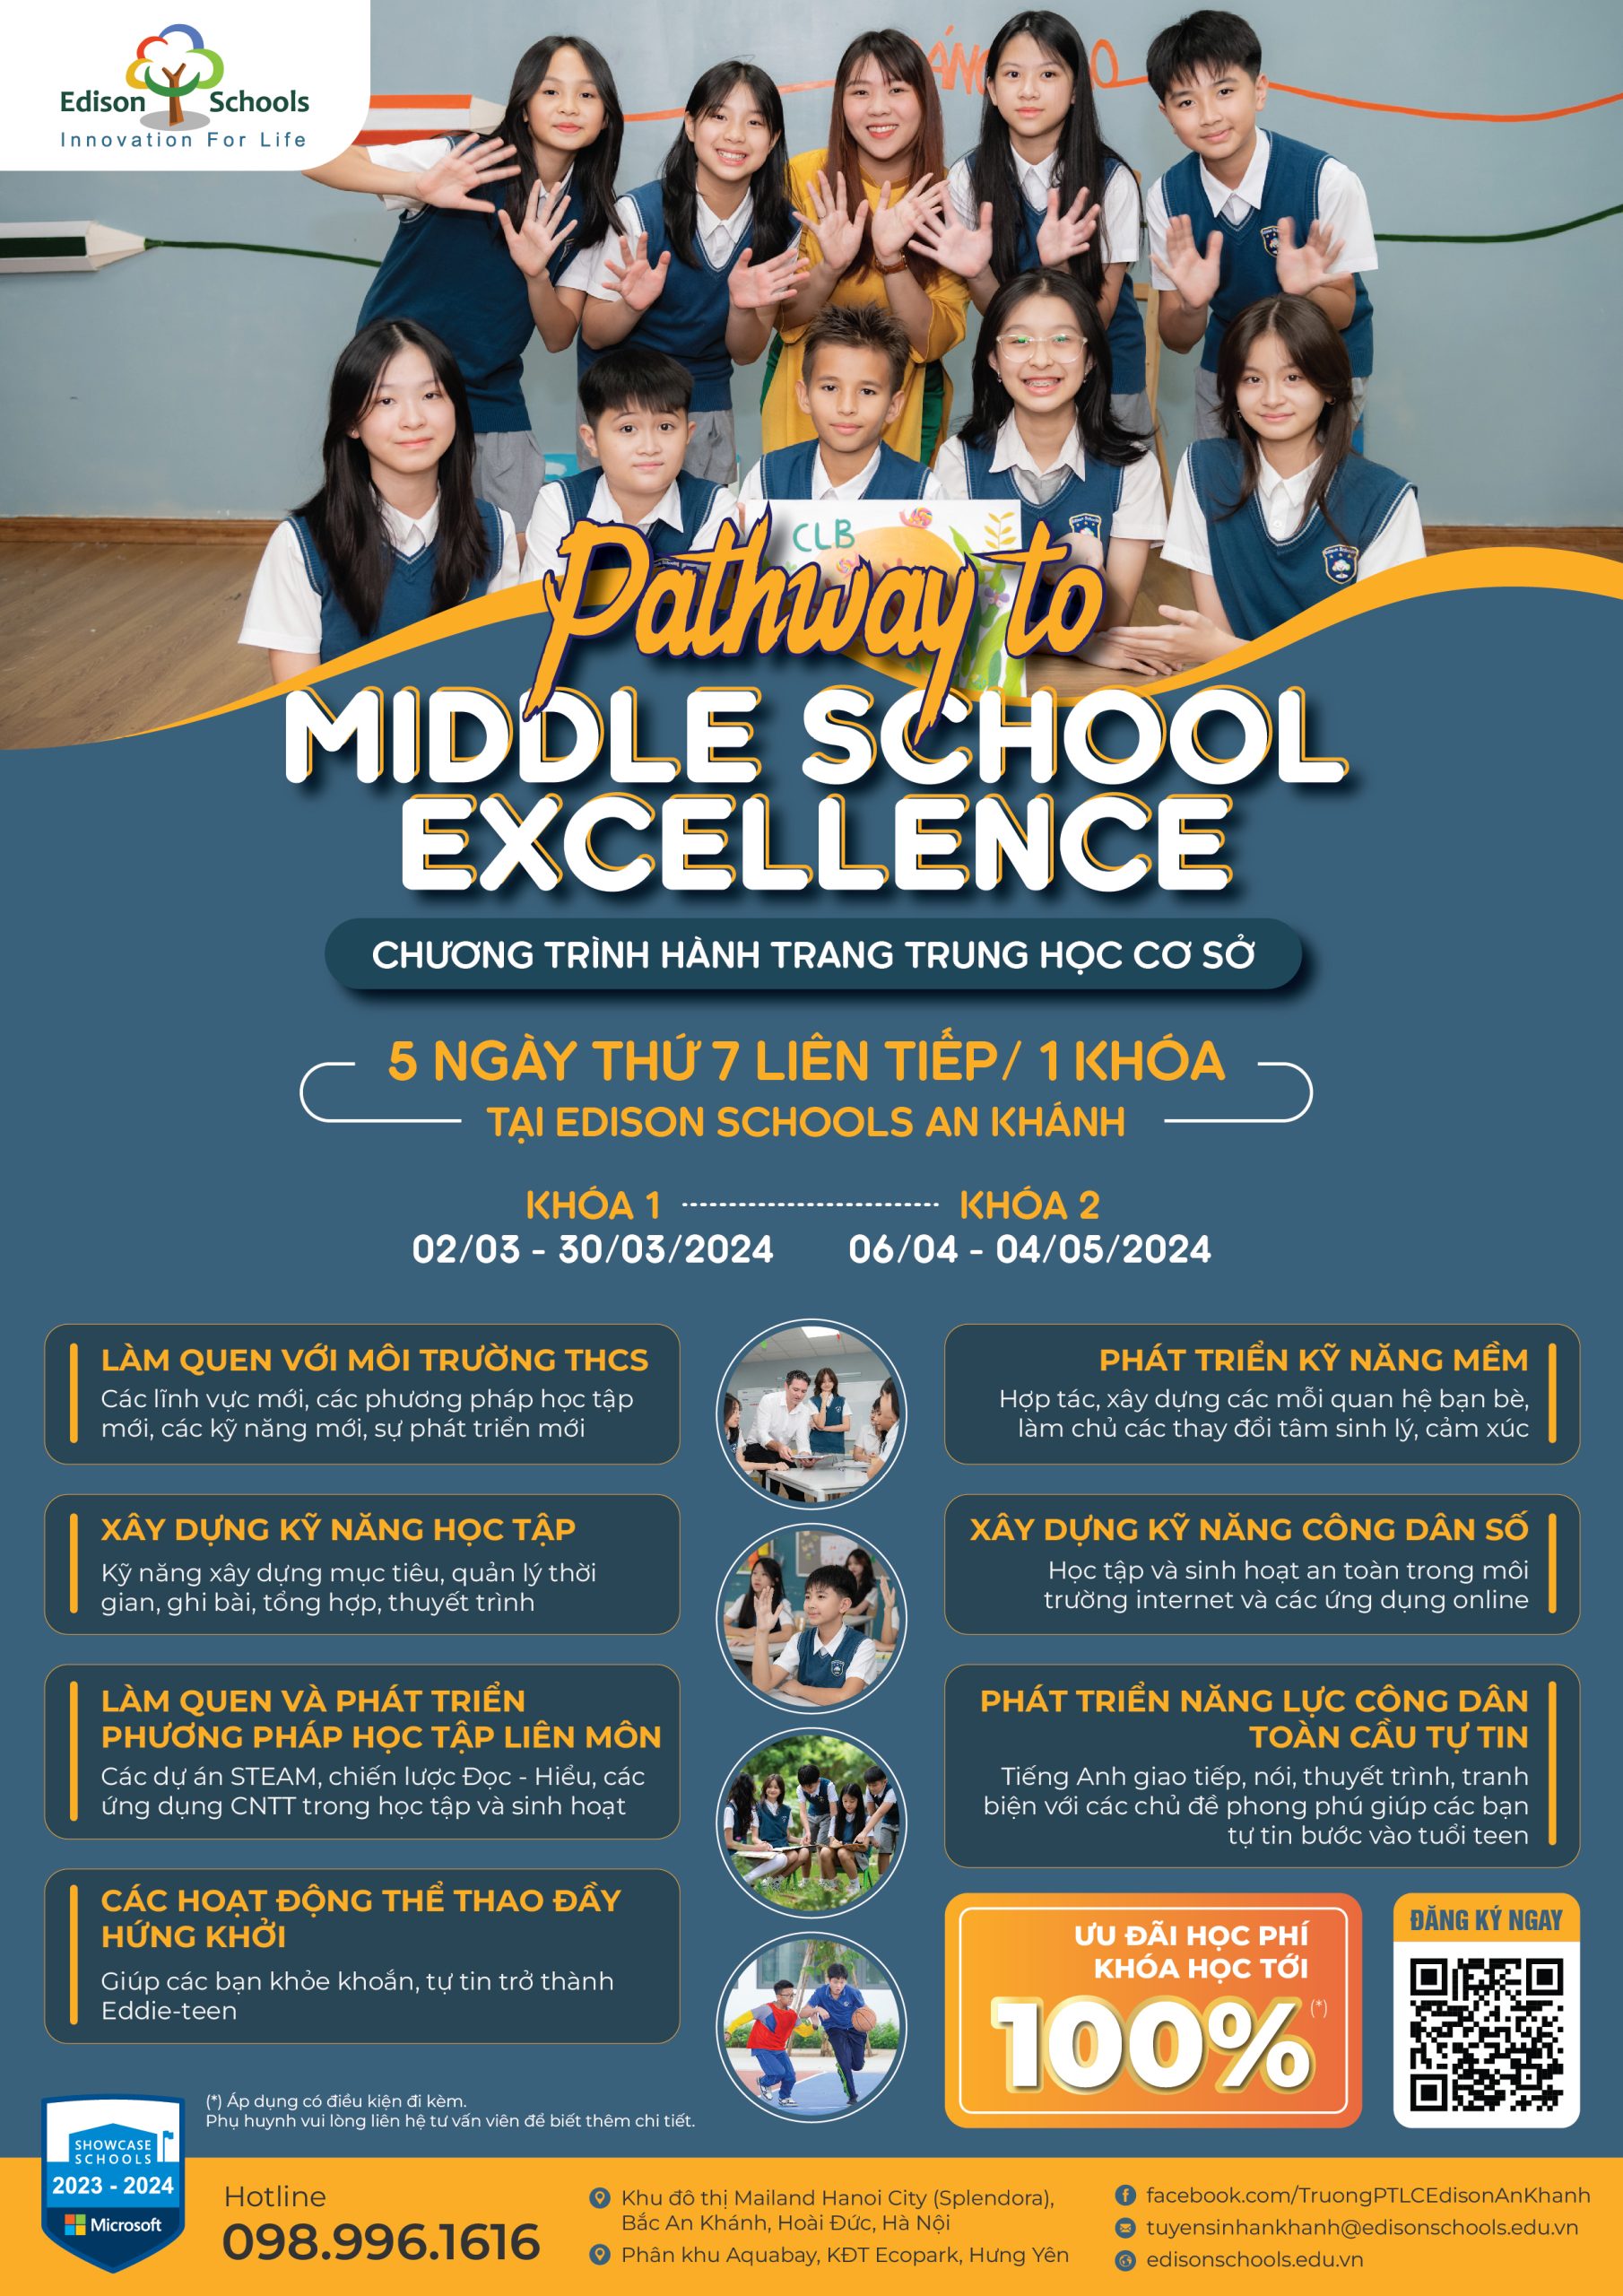 2. Secondary school experience course